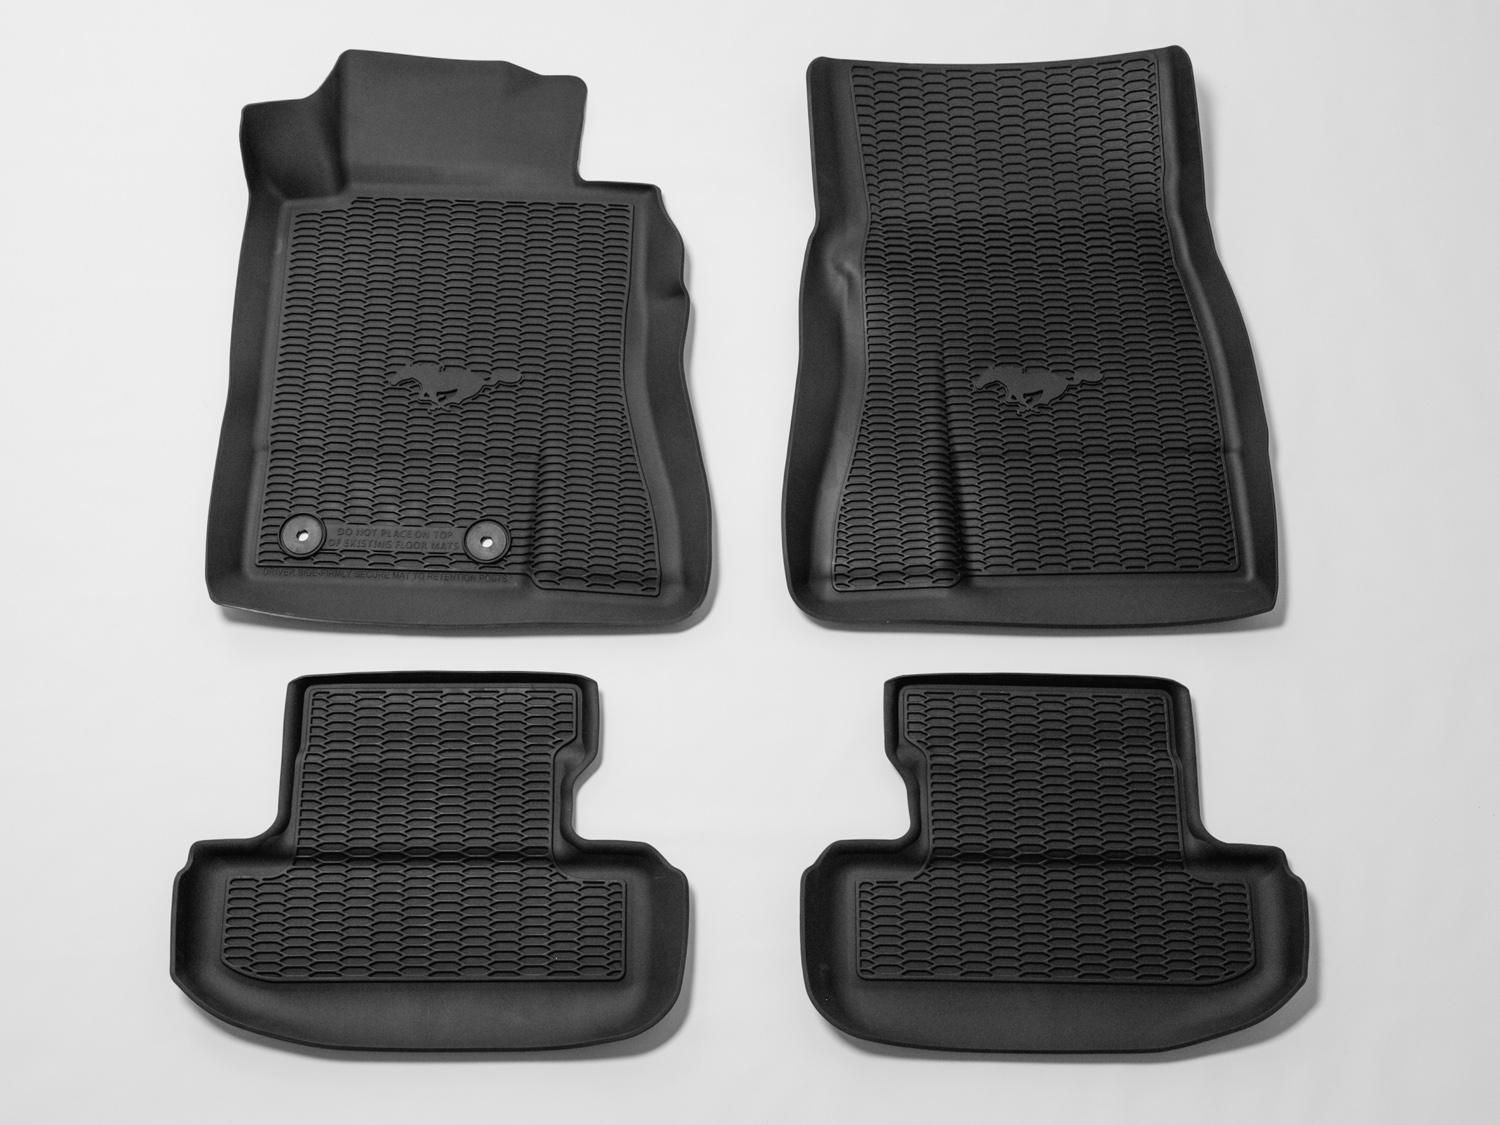 Car Tissue Box Towel Set for Ford Focus 2 3 Cmax Fusion Fiesta Mustang